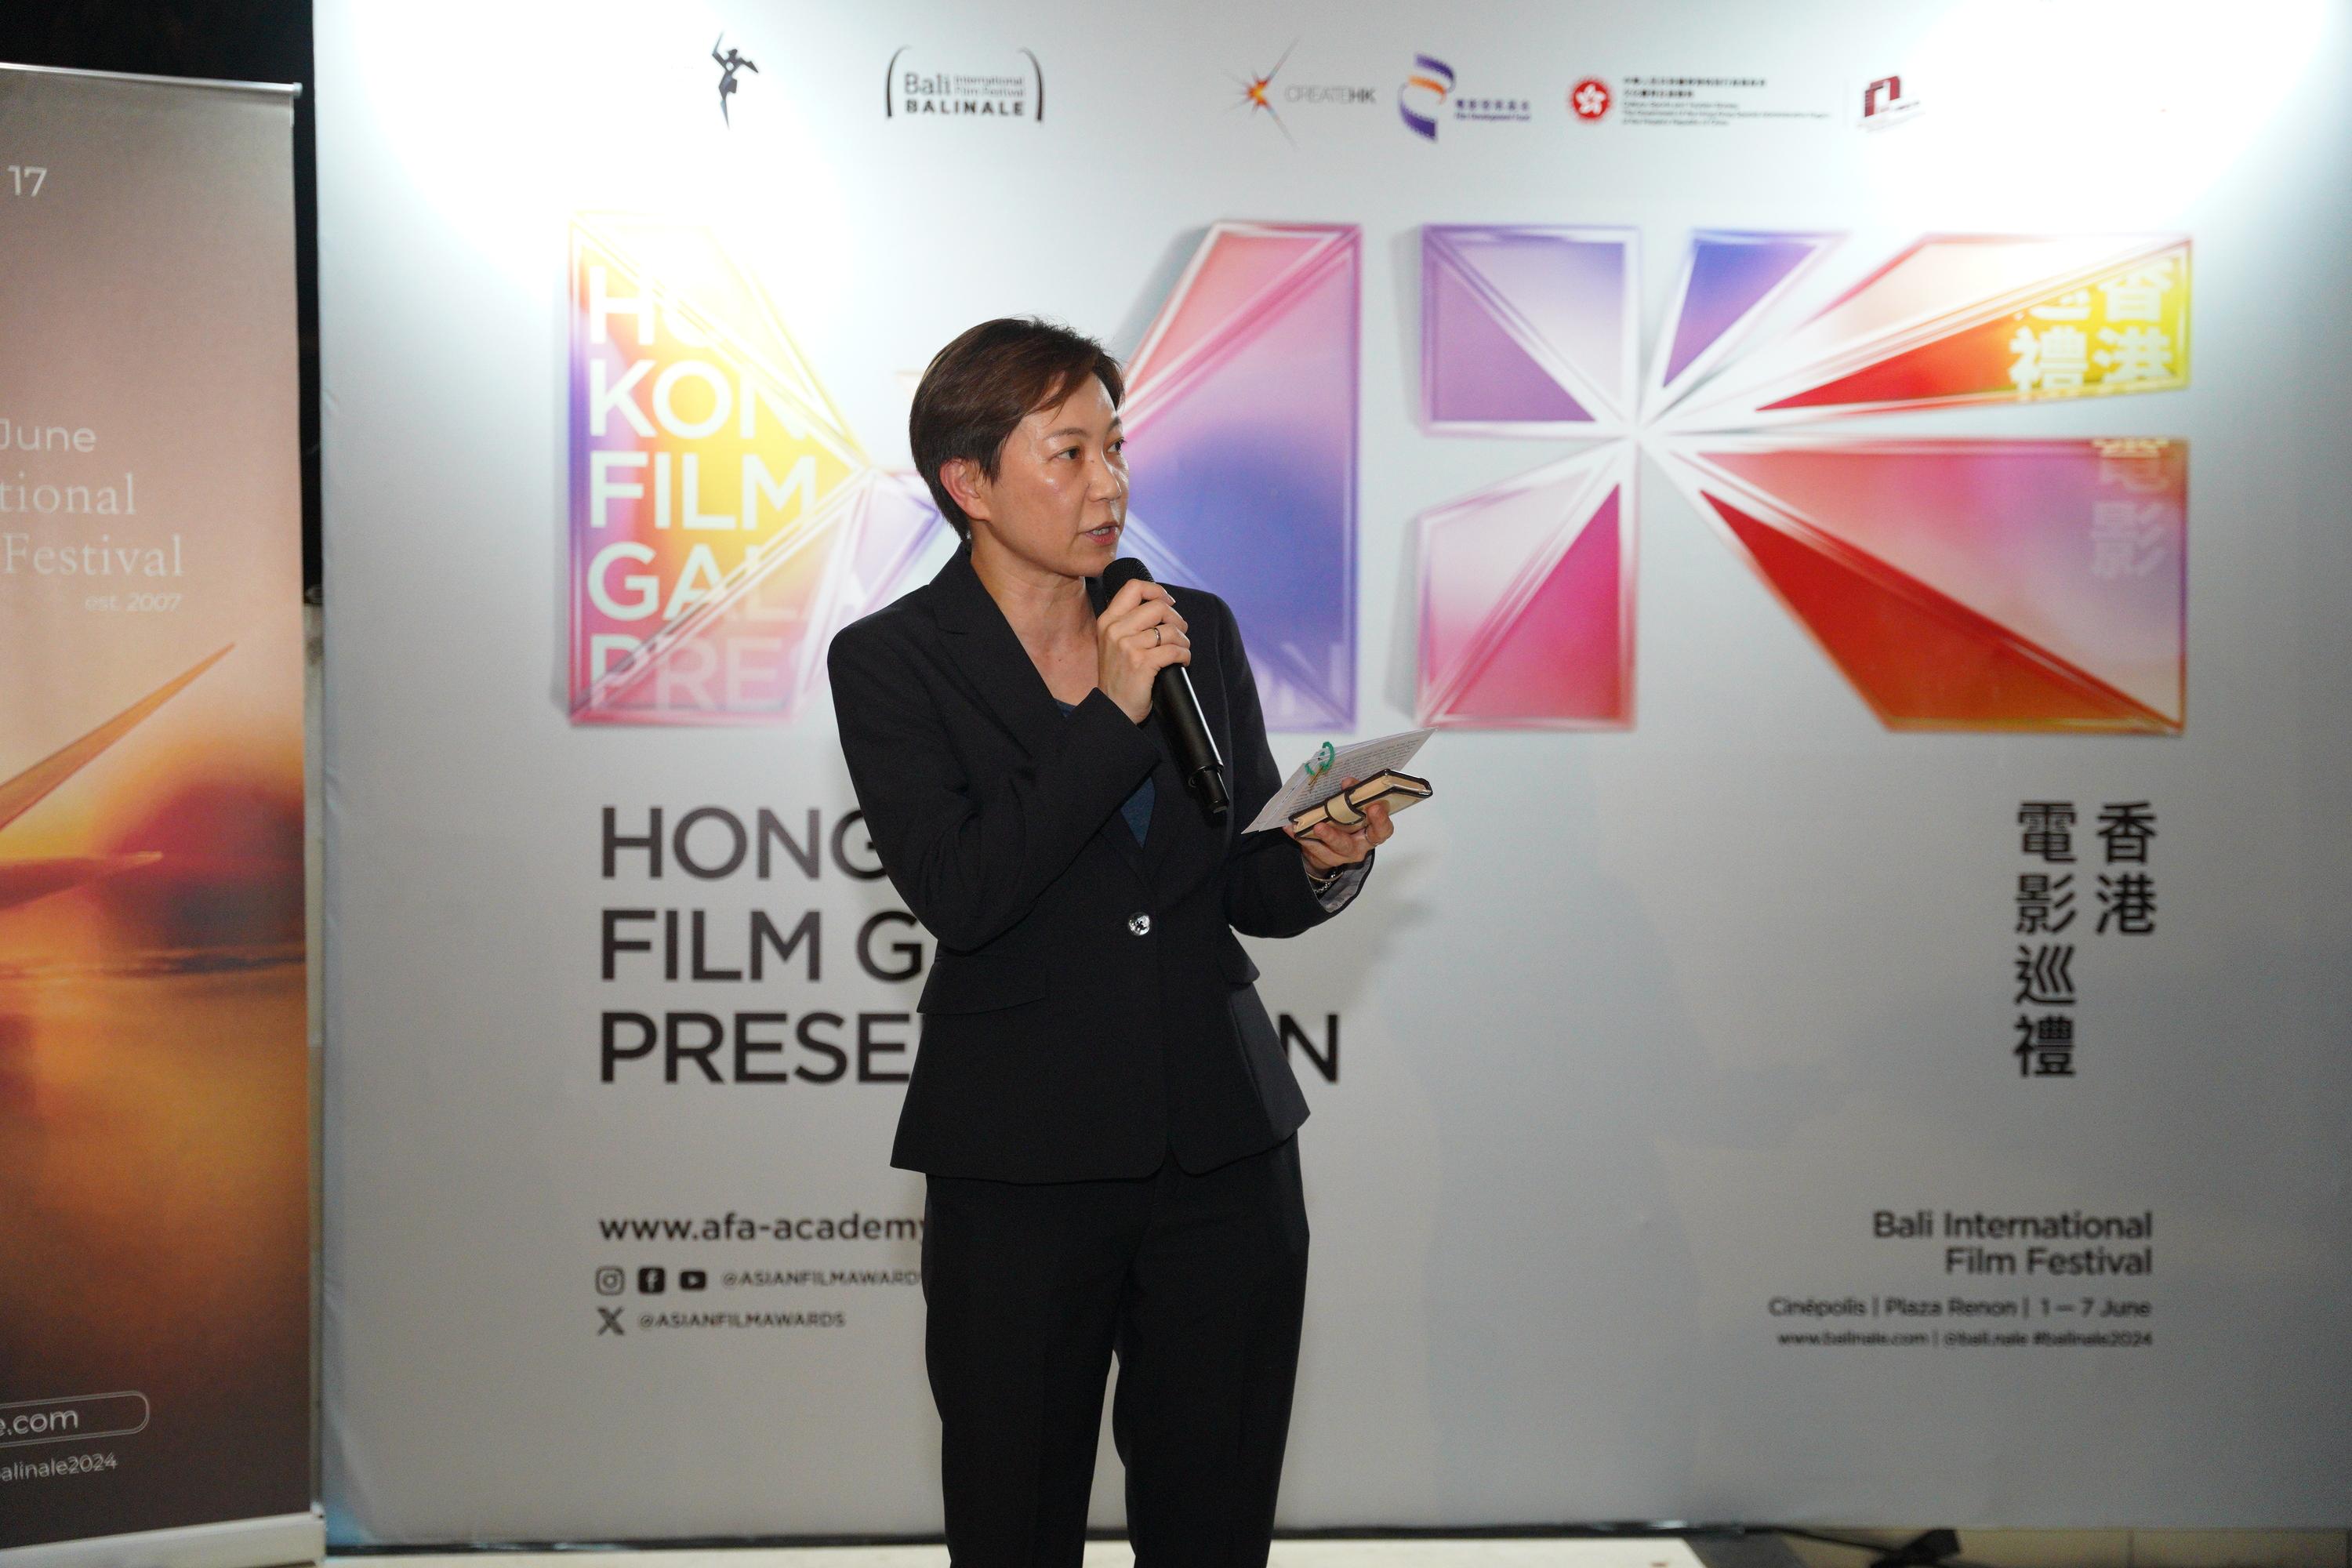 The Hong Kong Economic and Trade Office, Jakarta (HKETO Jakarta) collaborated with the Asian Film Awards Academy to participate in the 17th Bali International Film Festival in Bali, Indonesia. Photo shows the Director-General of the HKETO Jakarta, Miss Libera Cheng, delivering remarks at the opening reception today (June 1).